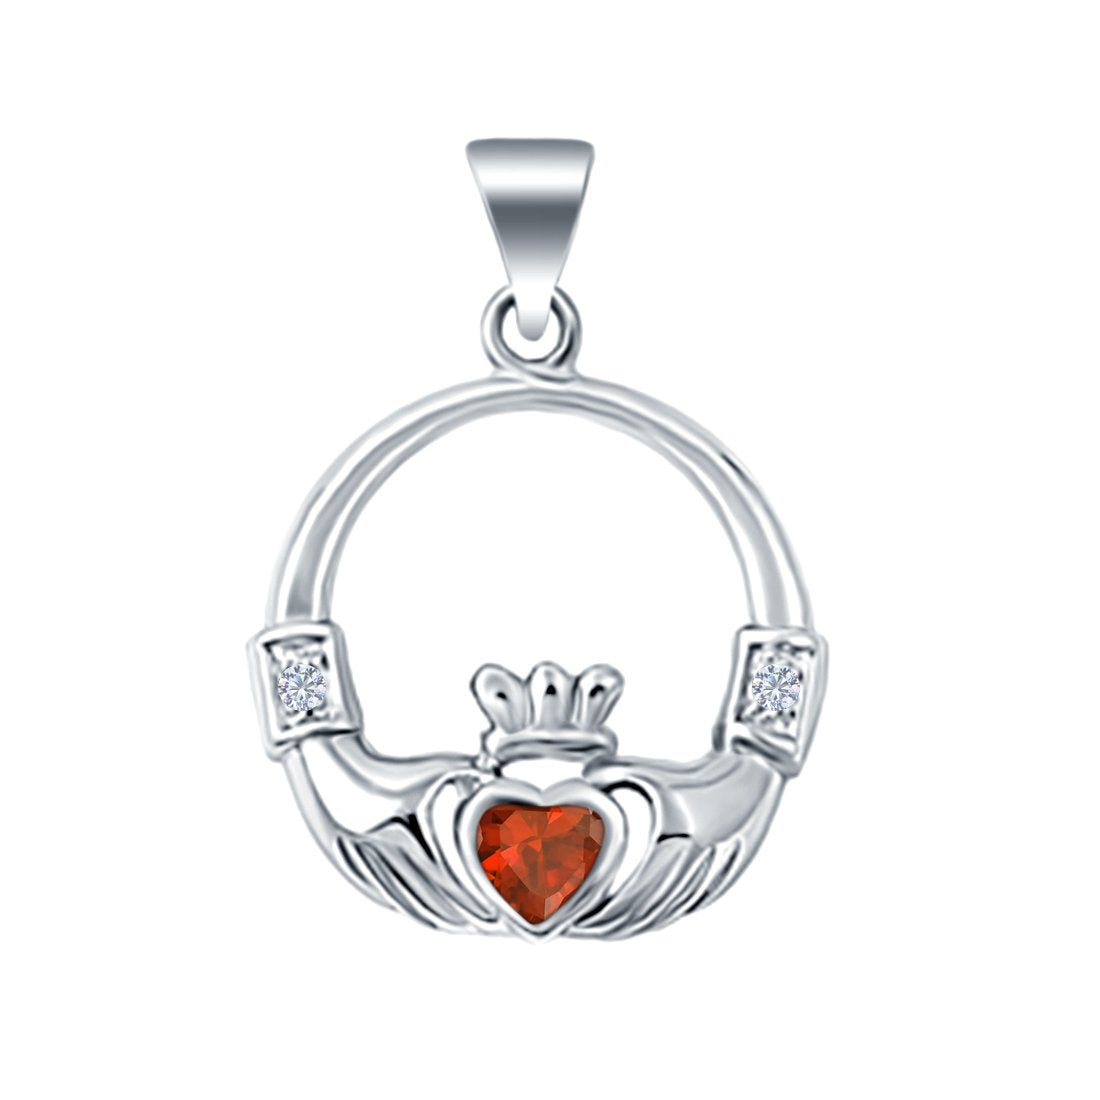 Silver Claddagh Charm Pendant Heart Simulated Cubic Zirconia 925 Sterling Silver (23mm)